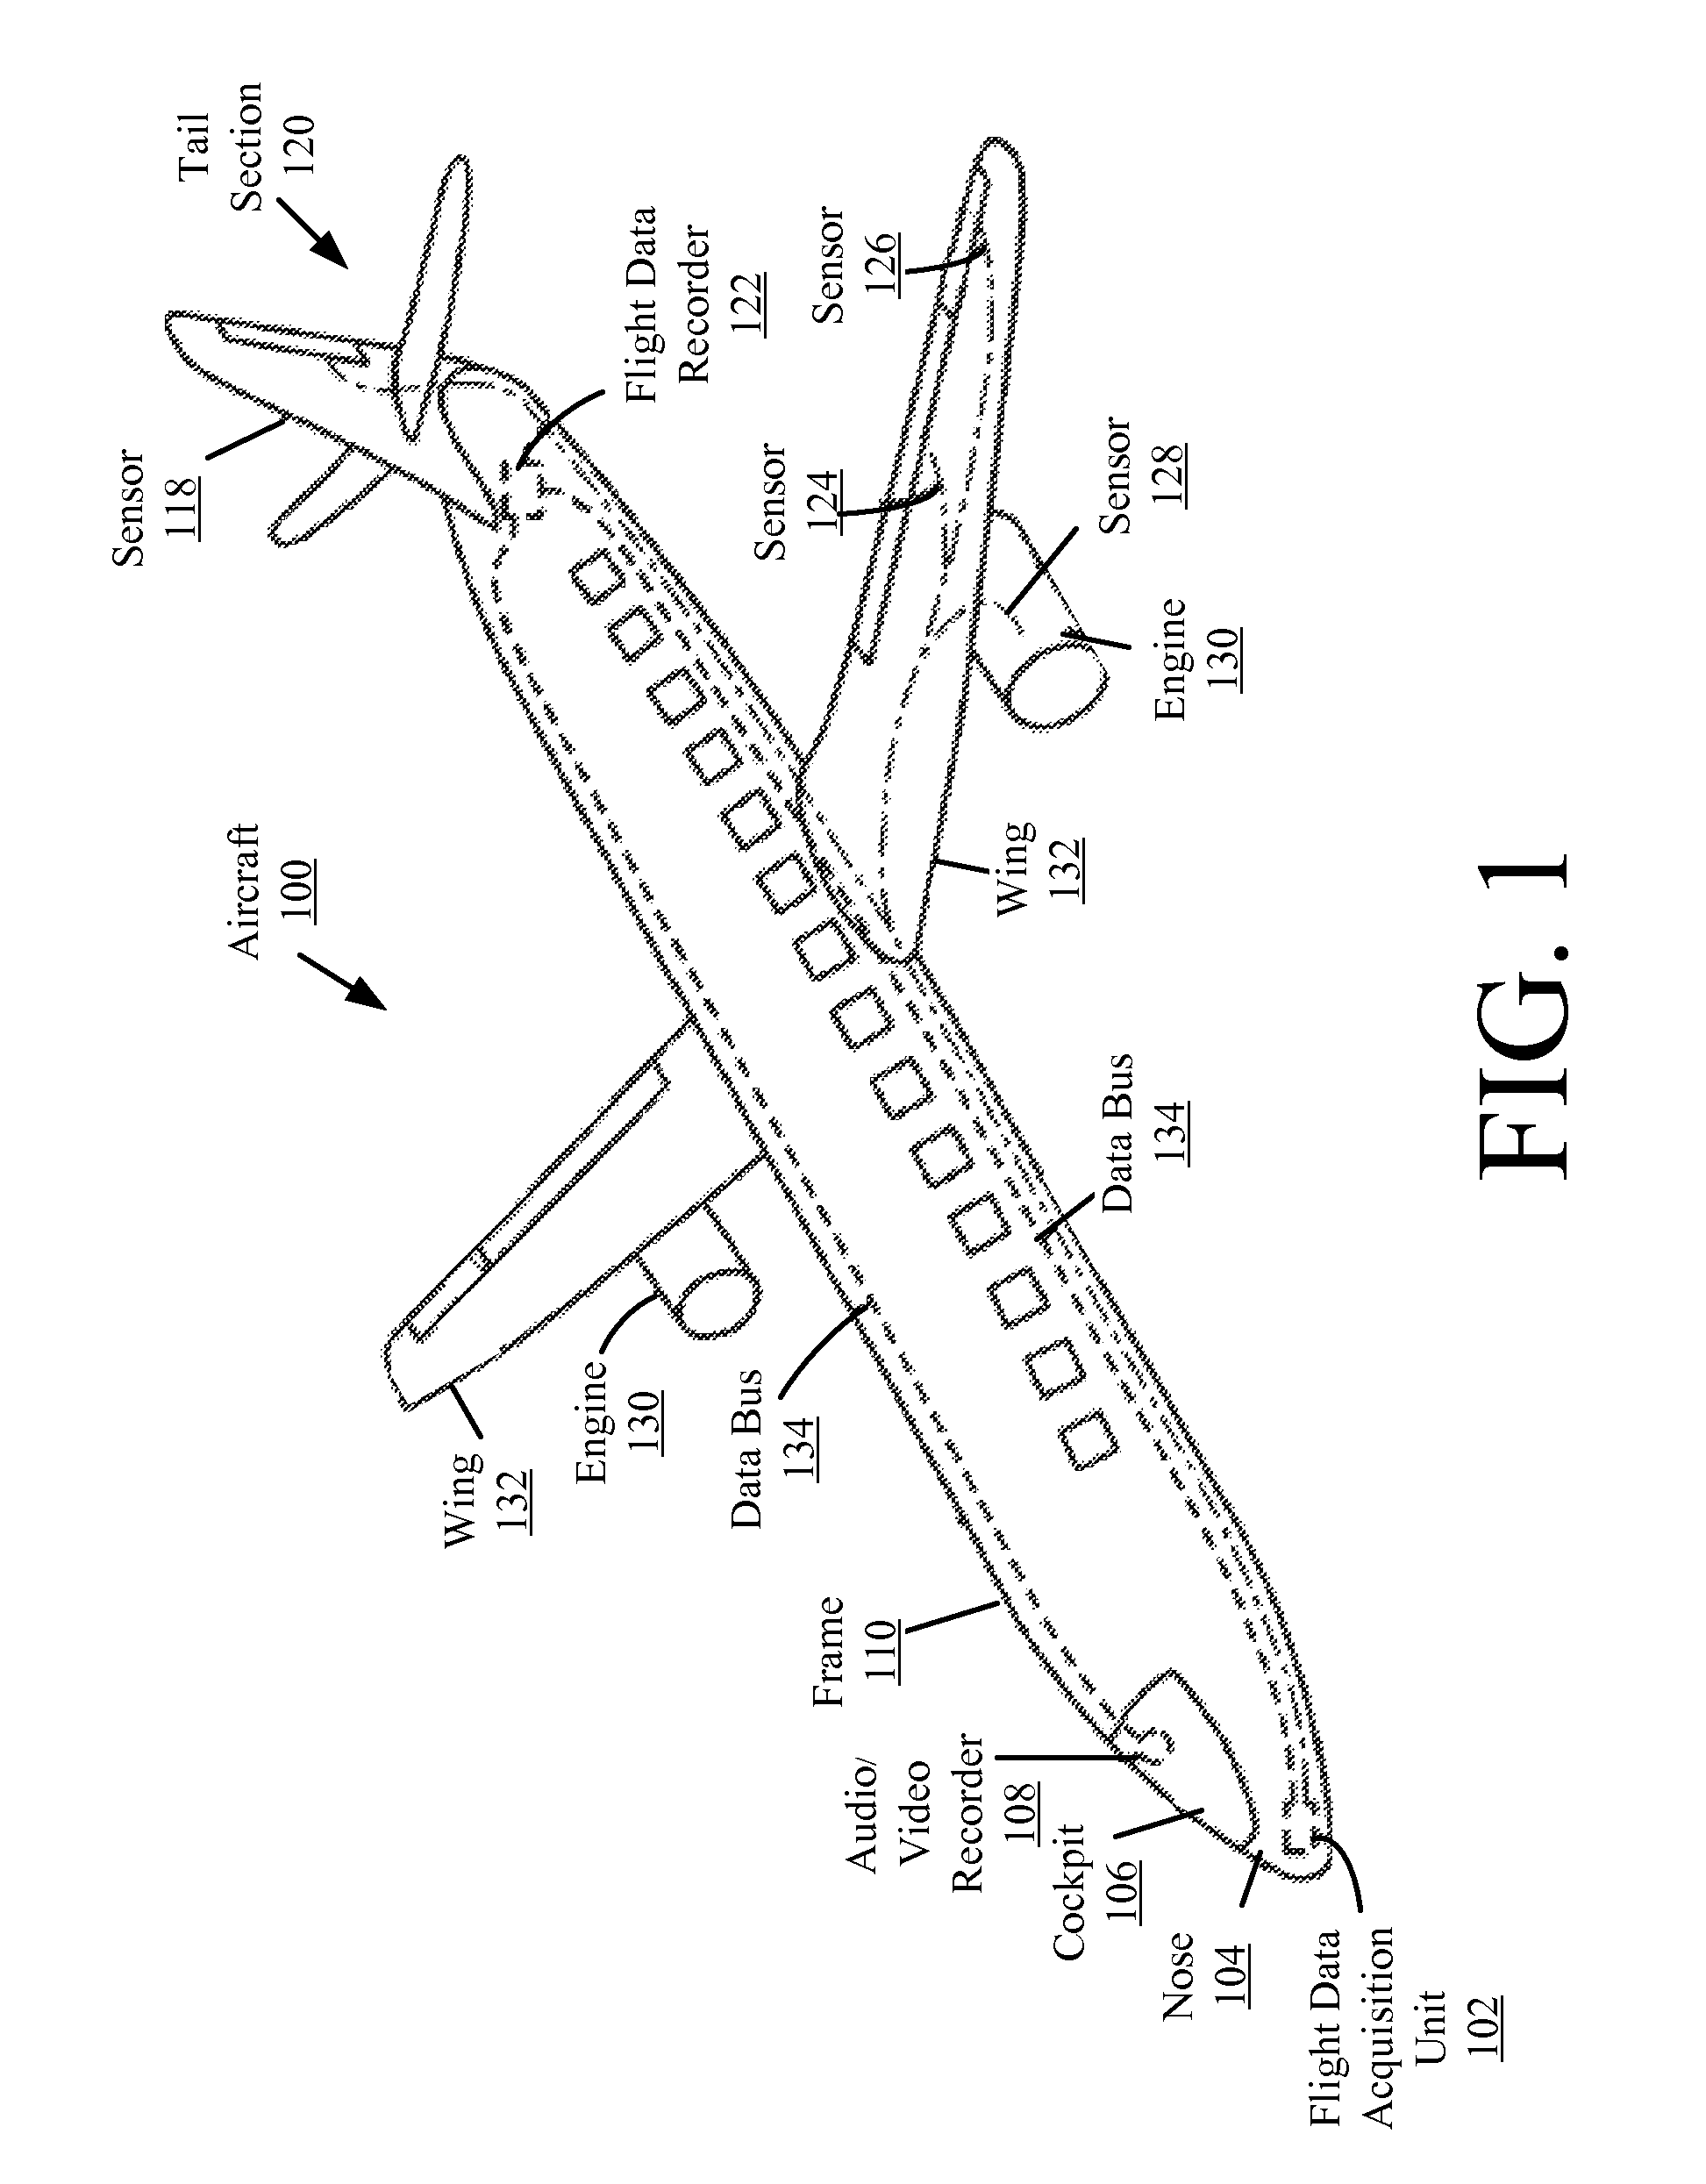 System and methods for wireless health monitoring of a locator beacon which aids the detection and location of a vehicle and/or people